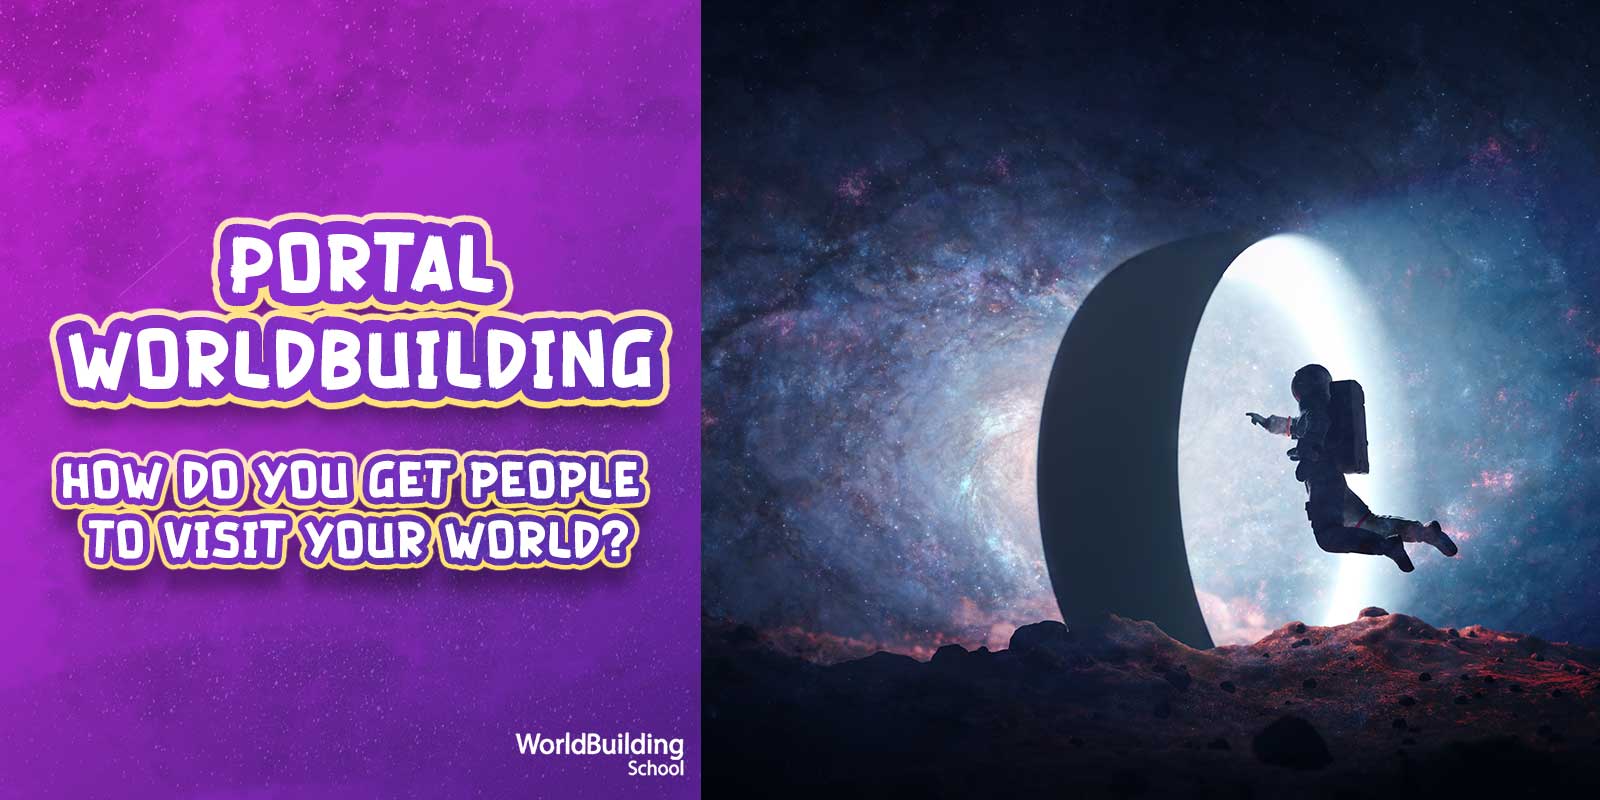 Portal worldbuilding - how to you get people to visit your world? Spaceman going through a portal.